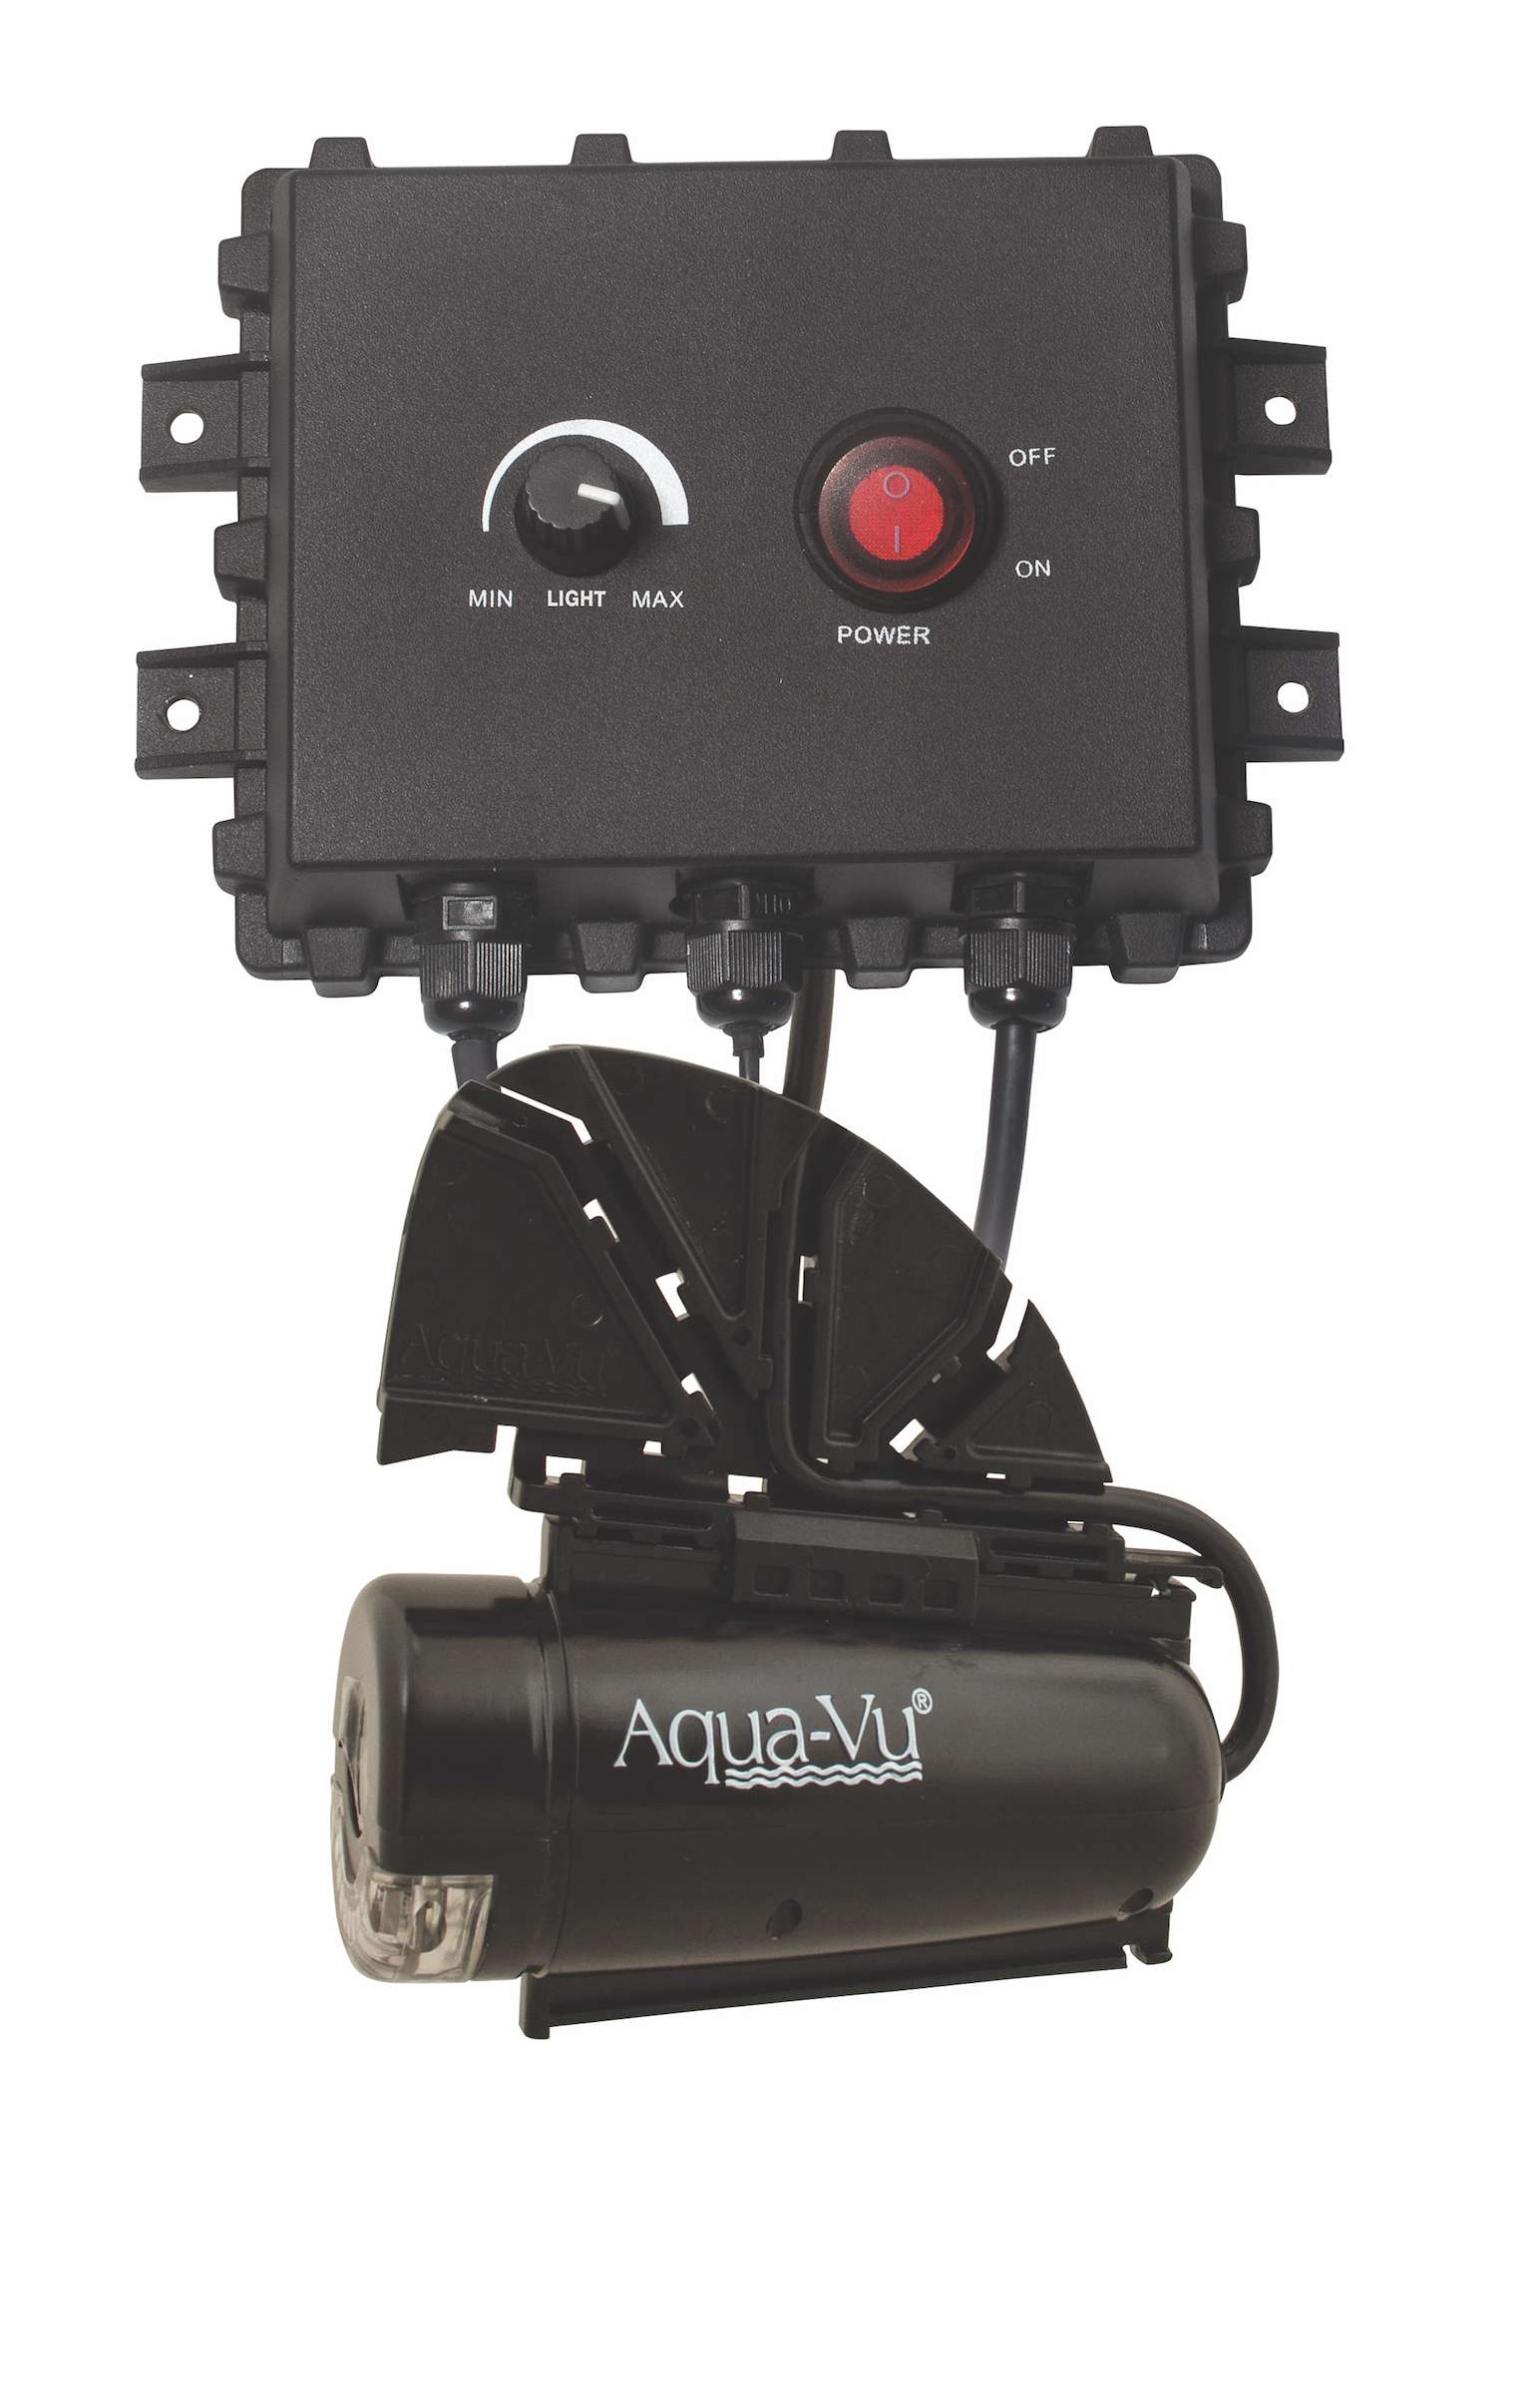 Multi-Vu XD Underwater Camera Adaptor System	<br>
Aqua-Vu<br>
$349.99<br>
Where sonar provides clues, an underwater camera reveals real-life answers. Both tools belong in the boat and in your ice fishing shelter. And now, thanks to a new device from Aqua-Vu, anglers can see all perspectives of the underwater world on a single screen. The Multi-Vu XD Underwater Camera Adaptor System instantly adds underwater video functionality to your boatâs sonar, or a TV or video monitor inside your large ice fishing shelter.
<br><br>
Coupled with the Multi-Vu XD System, any sonar or TV equipped with an analog video input can be immediately transformed into a clear, colorful underwater viewer. Compatible sonar systems include products from Lowrance, Garmin and Raymarine. 
<br><br>
The complete Multi-Vu Underwater Viewing Adaptor System features a high-res (600 lines of resolution) Aqua-Vu Color Underwater Video Camera with adjustable IR lighting, exclusive XD Camera Housing, 75 feet of 200-pound-test cable with Cable Wrap and waterproof Multi-Vu Control Module with 12-volt power cable. 
